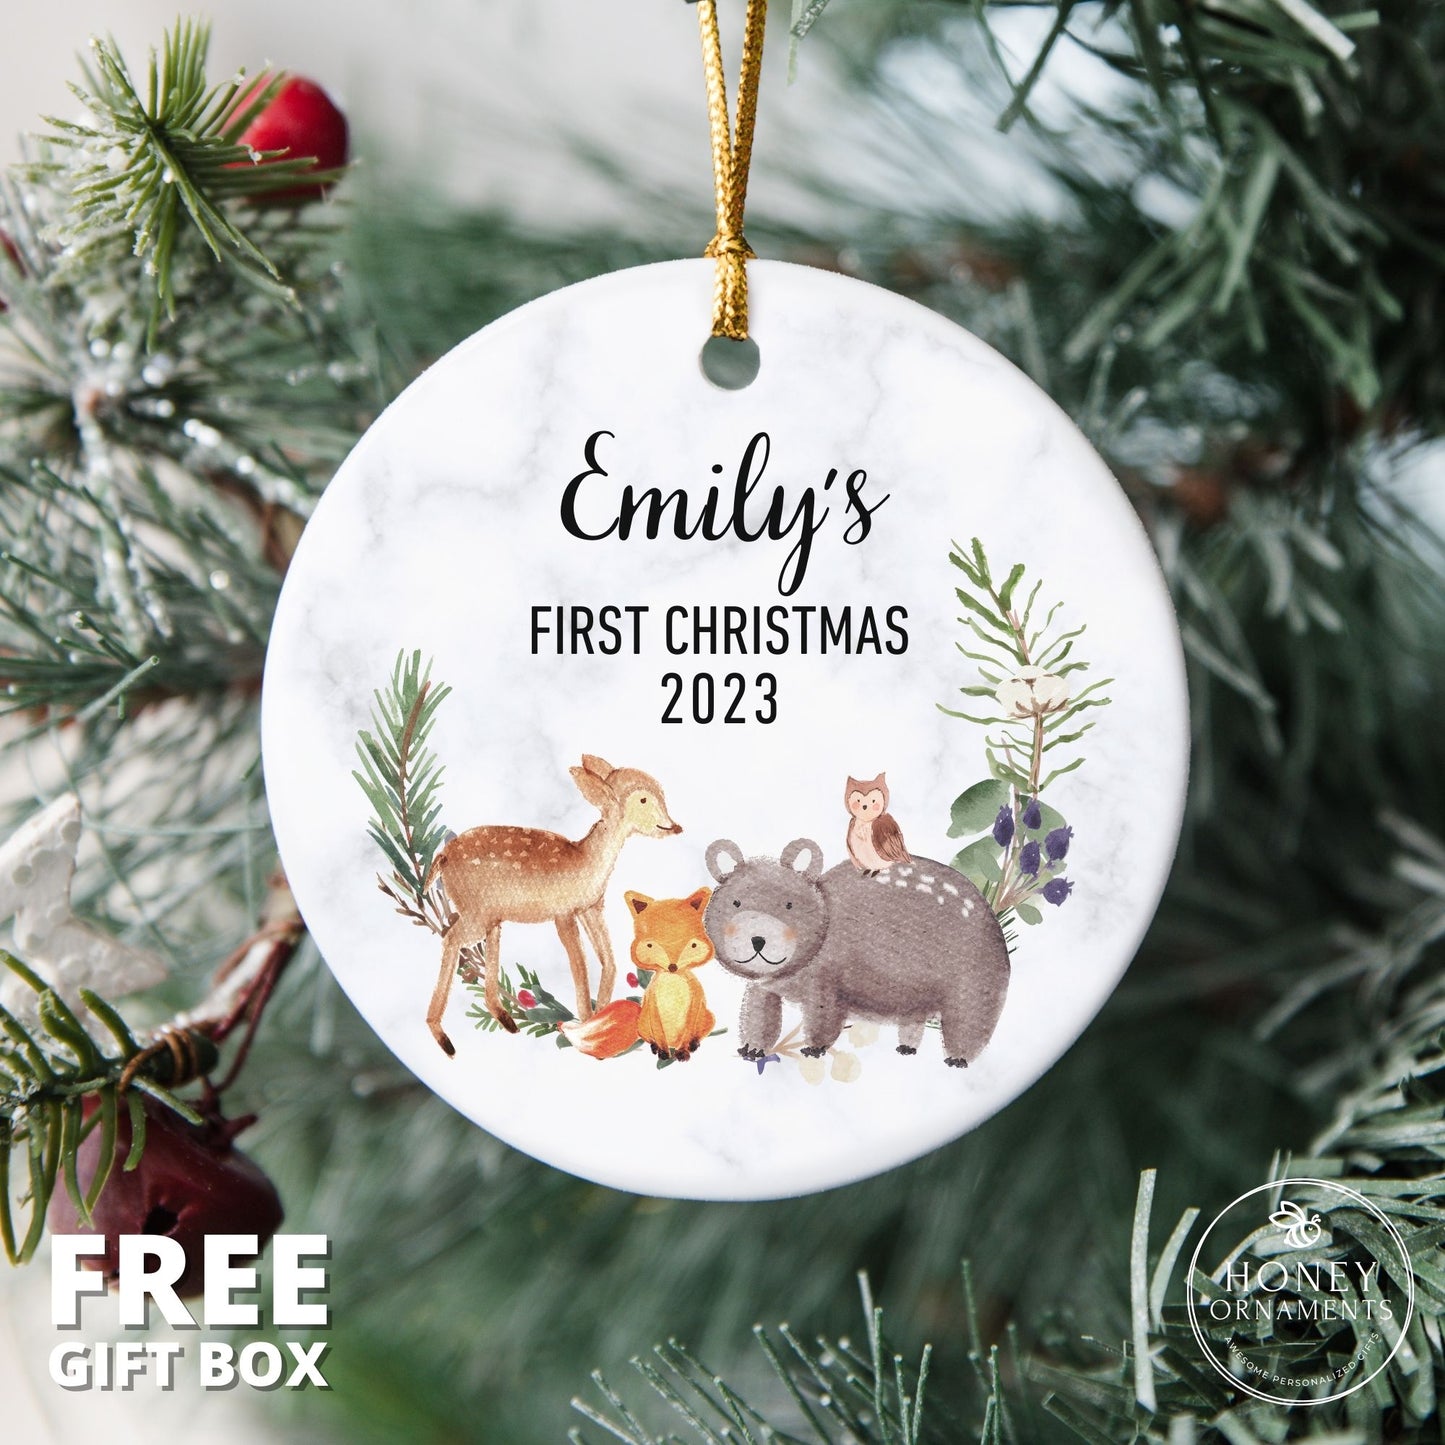 Personalized Baby's First Christmas Ornament - First Christmas Baby Ornament - Custom Baby Name Christmas Ornament Gifts - Baby Ornament